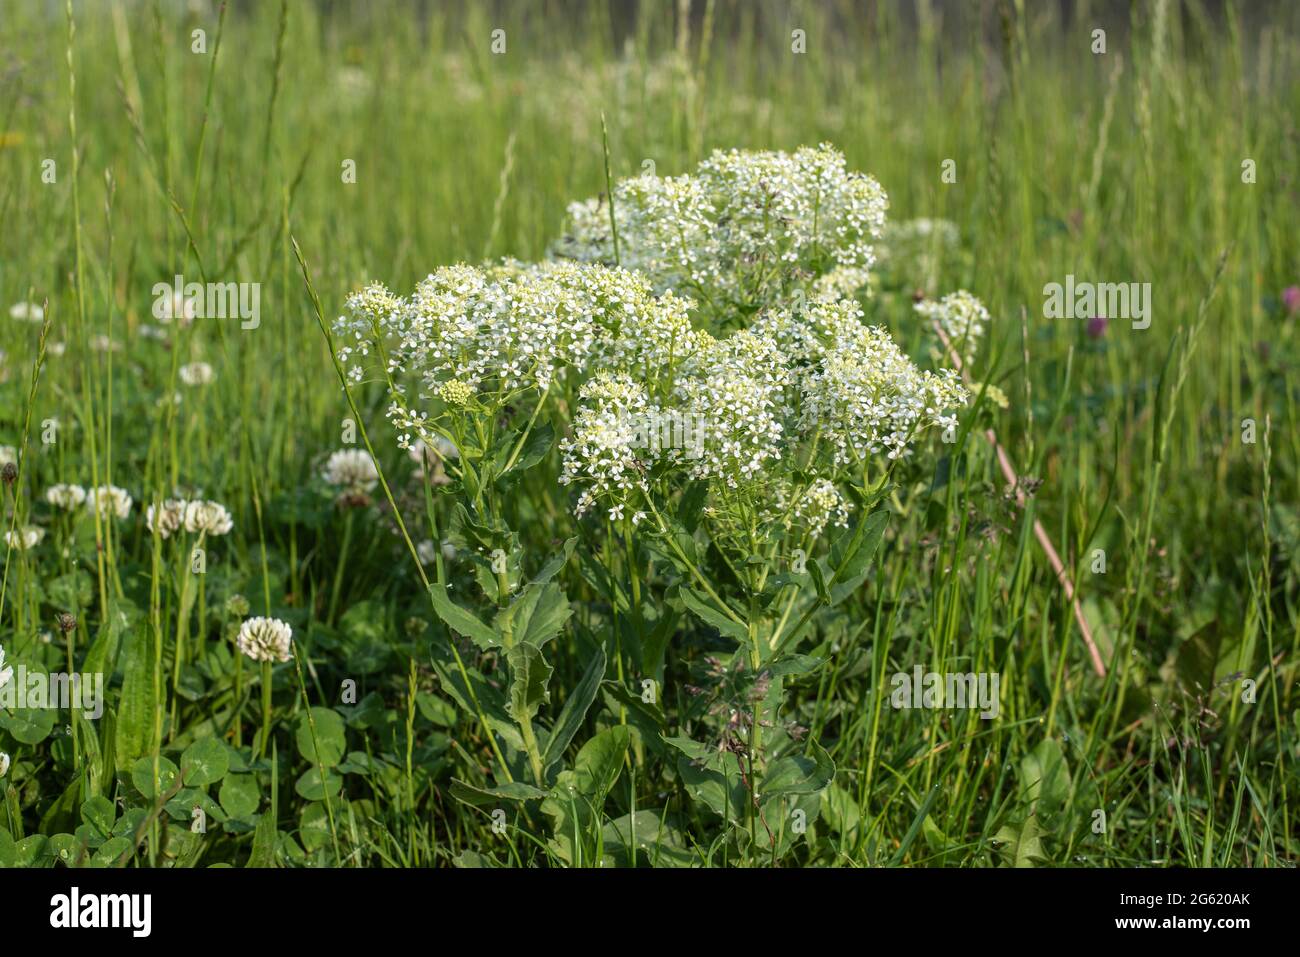 flowering plants of a hoary or white top cress with creamy white petals growing in a meadow Stock Photo